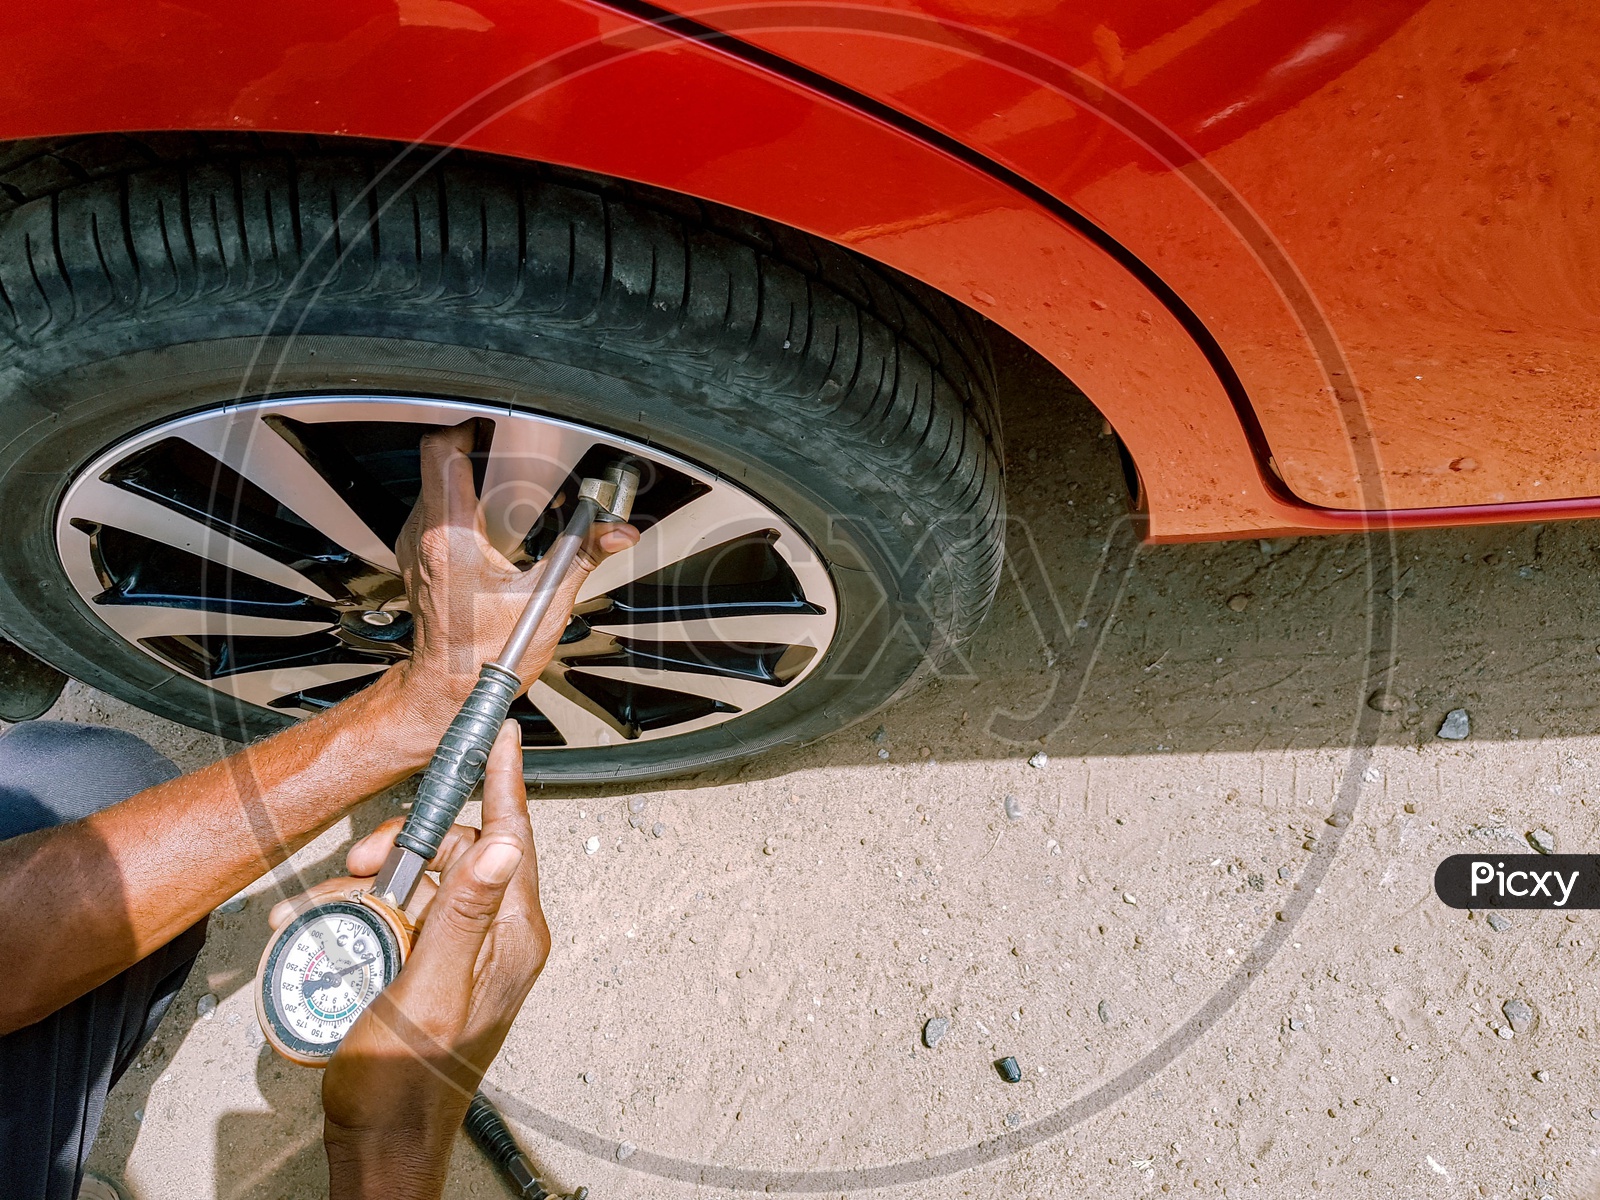 Checking Of Air Pressure With A Manometer In A Rear Tyre Of A Motor Car By Hand Of Mechanic